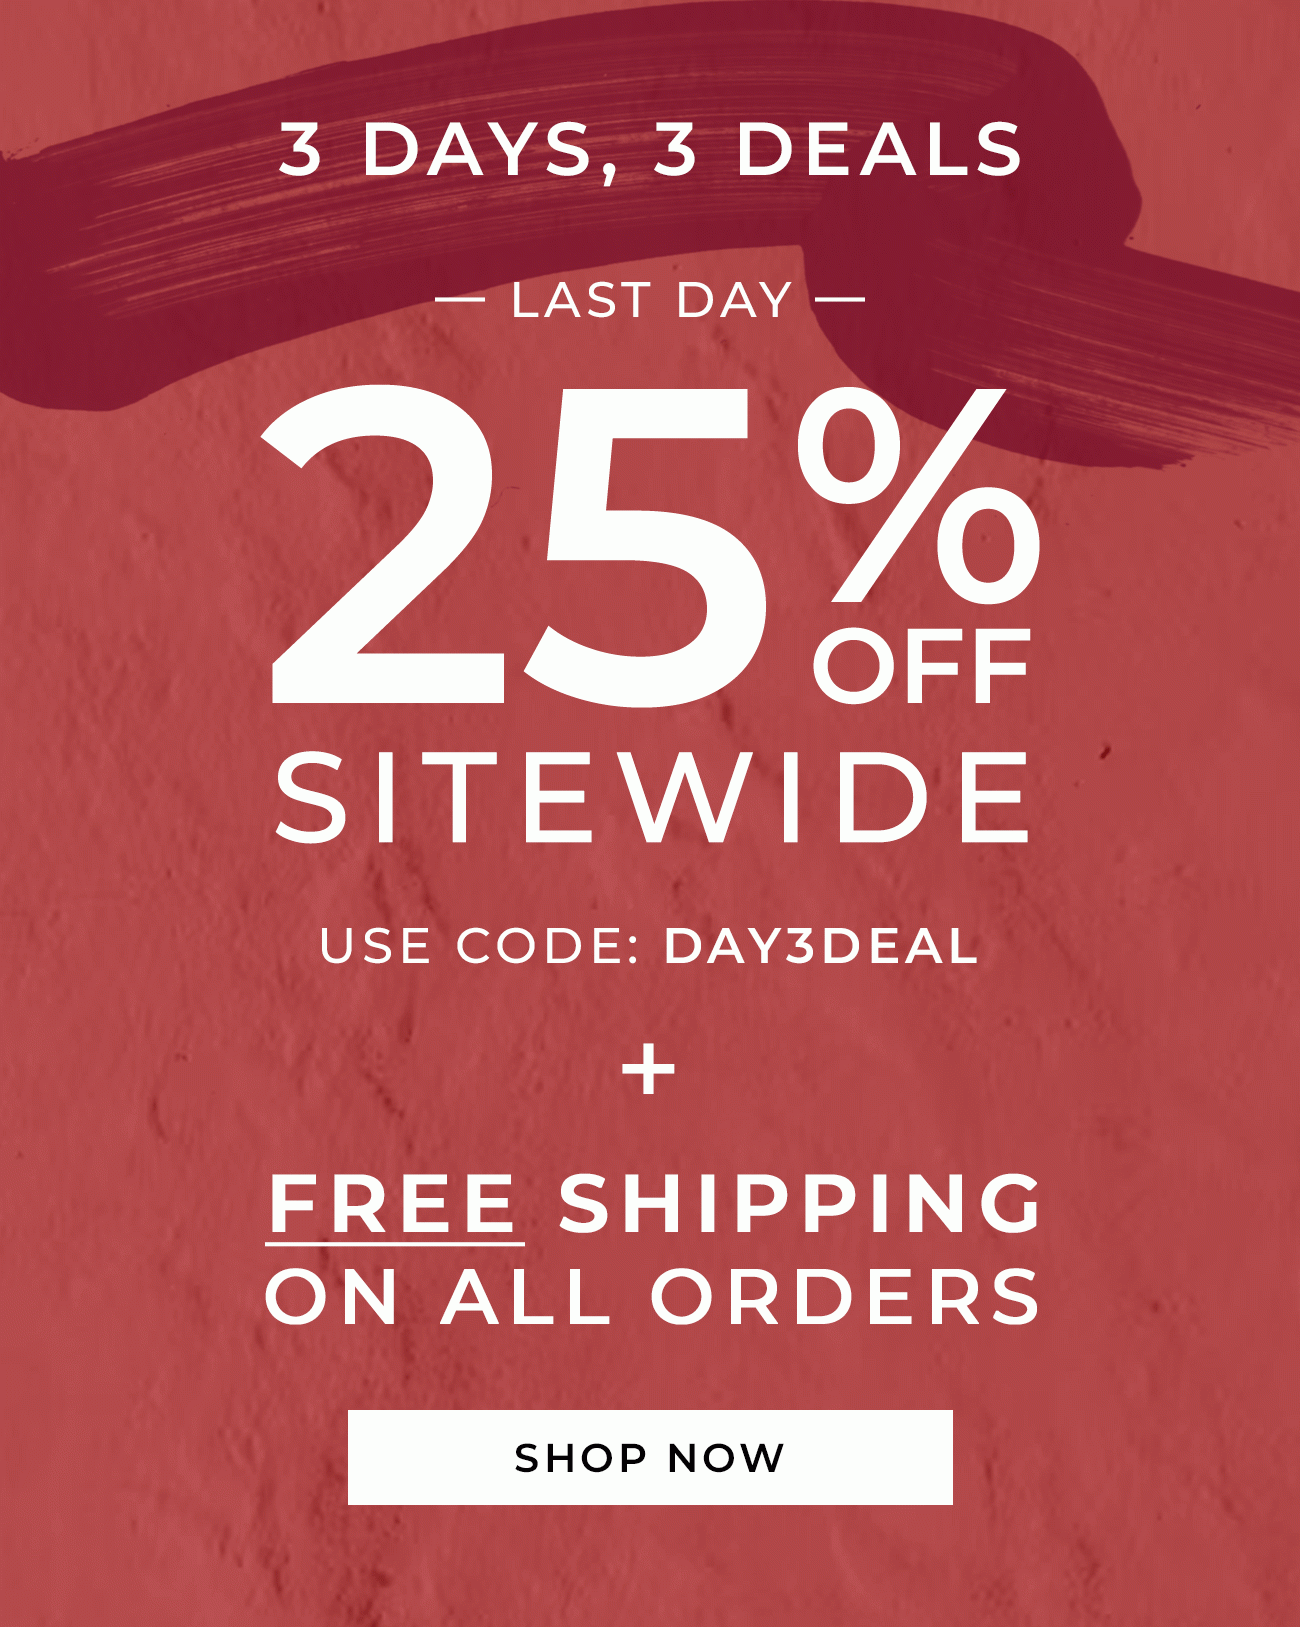 3 Days, 3 Deals - Last Day - 25% off Sitewide - Use Code: DAY3DEAL